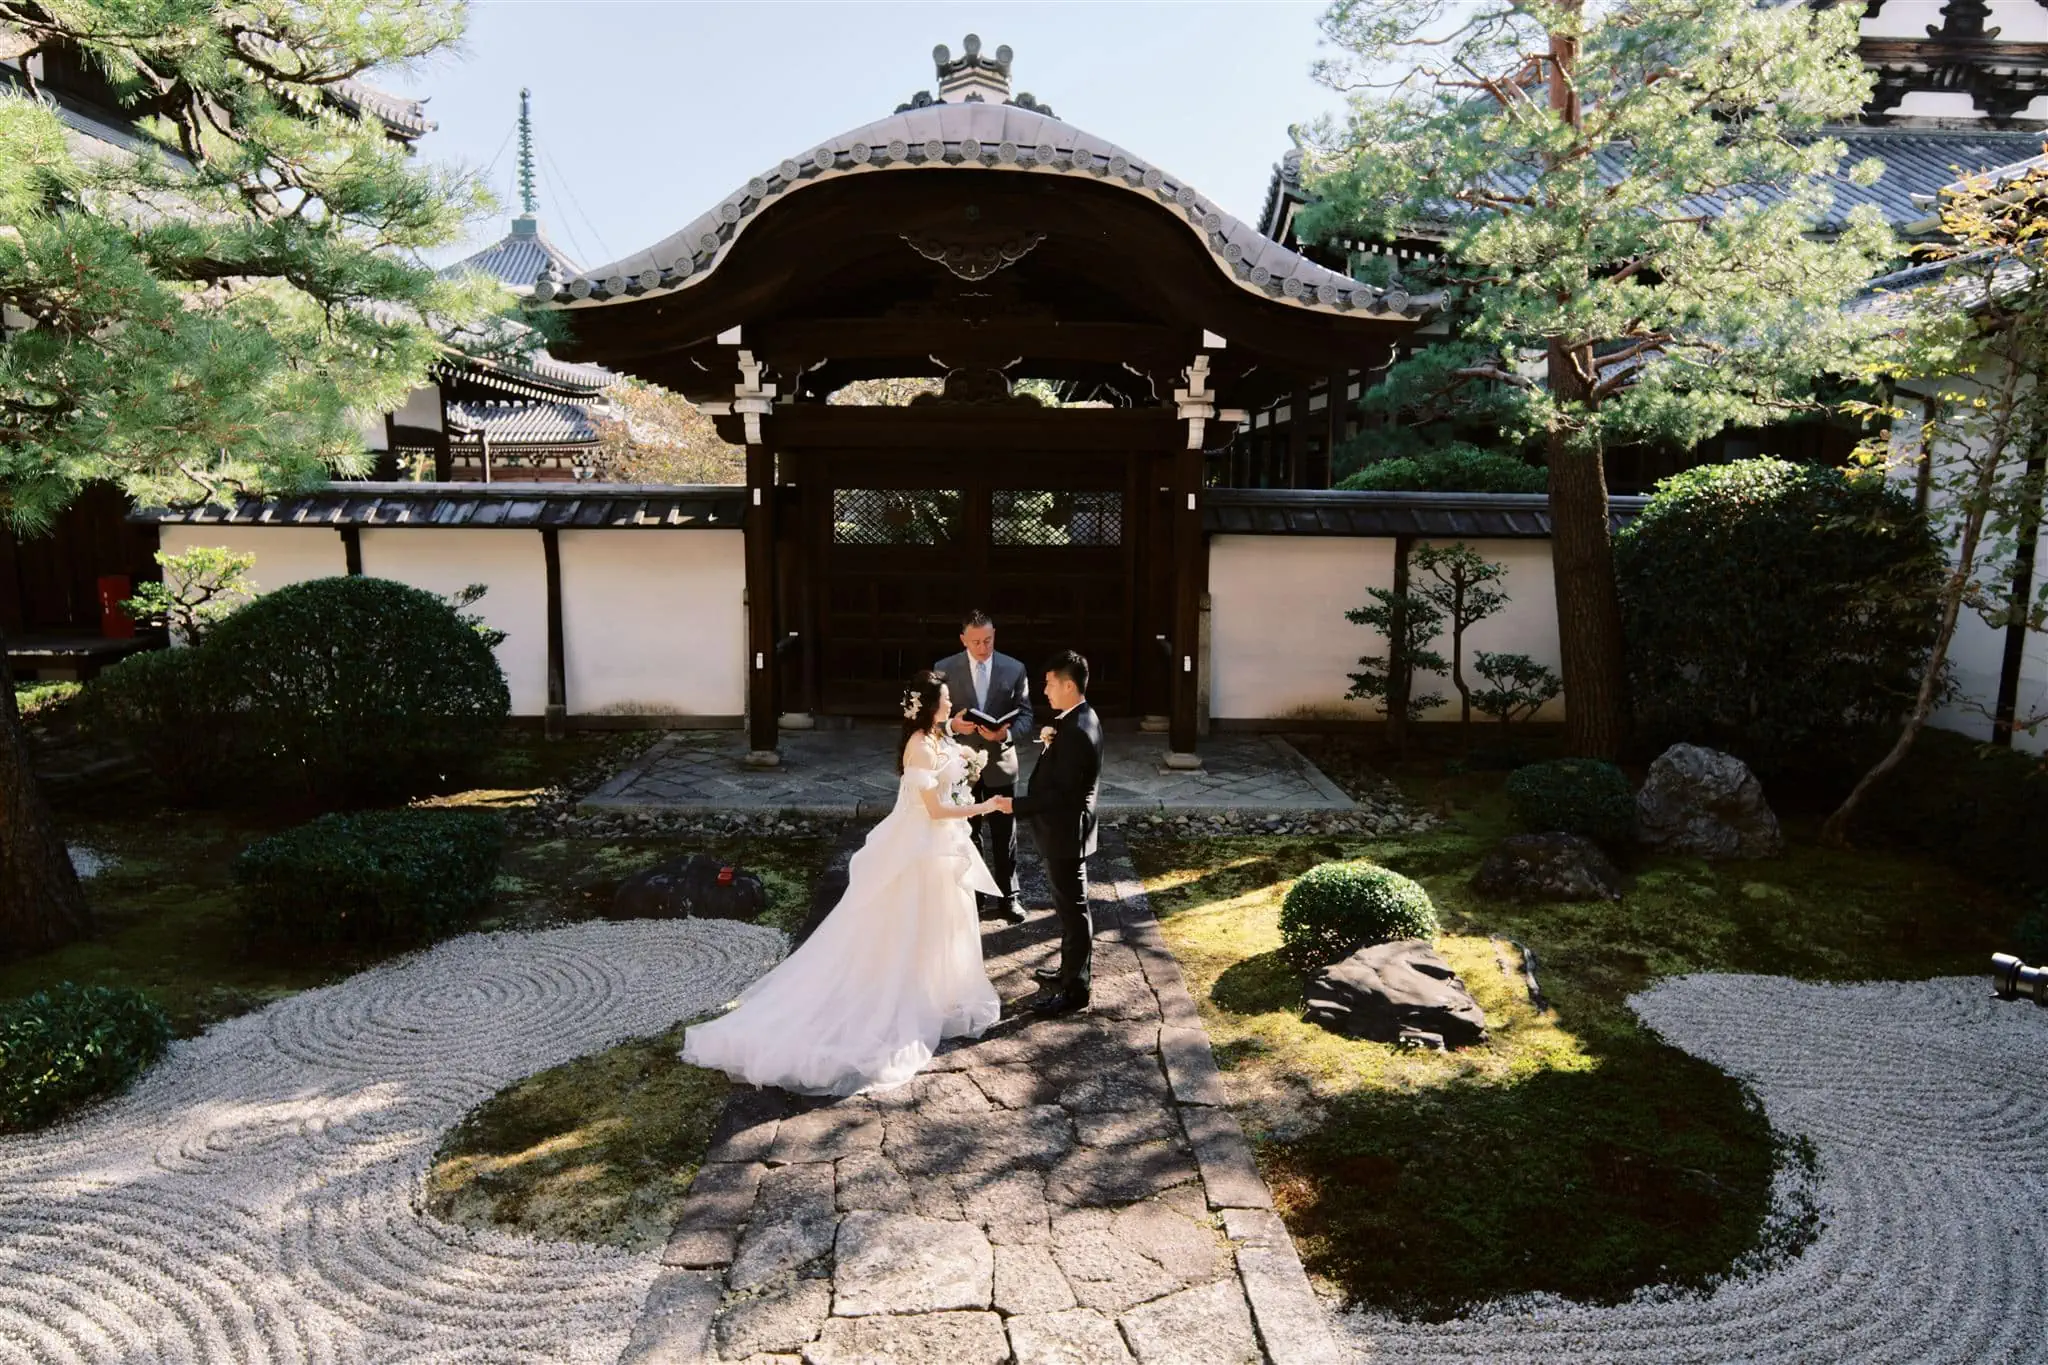 Kyoto Tokyo Japan Elopement Wedding Photographer, Planner & Videographer | A Japan Elopement featuring a bride and groom standing in front of a Japanese pagoda.